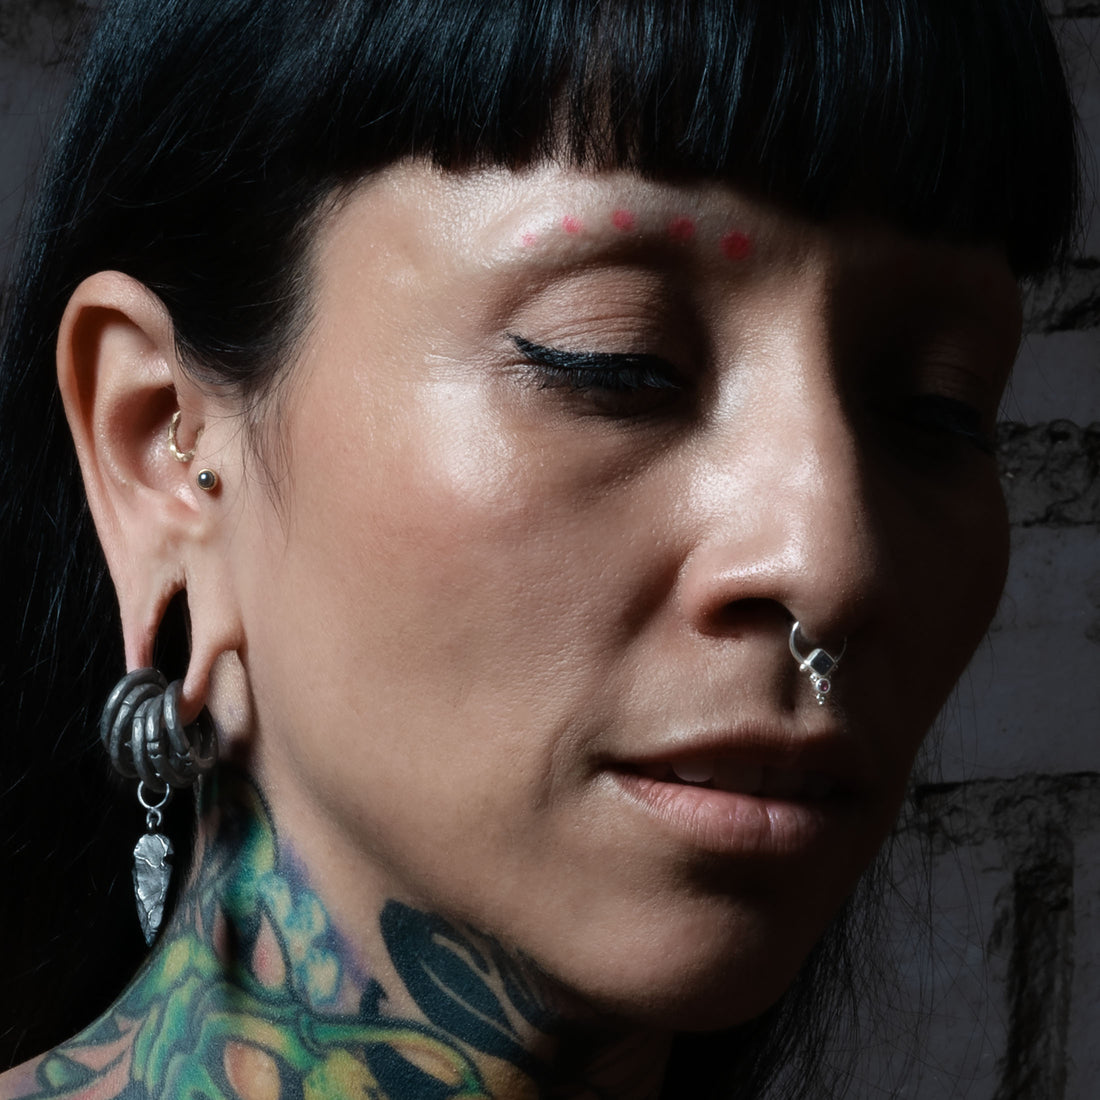 model wearing Golden Labret with Black Pearl on her tragus